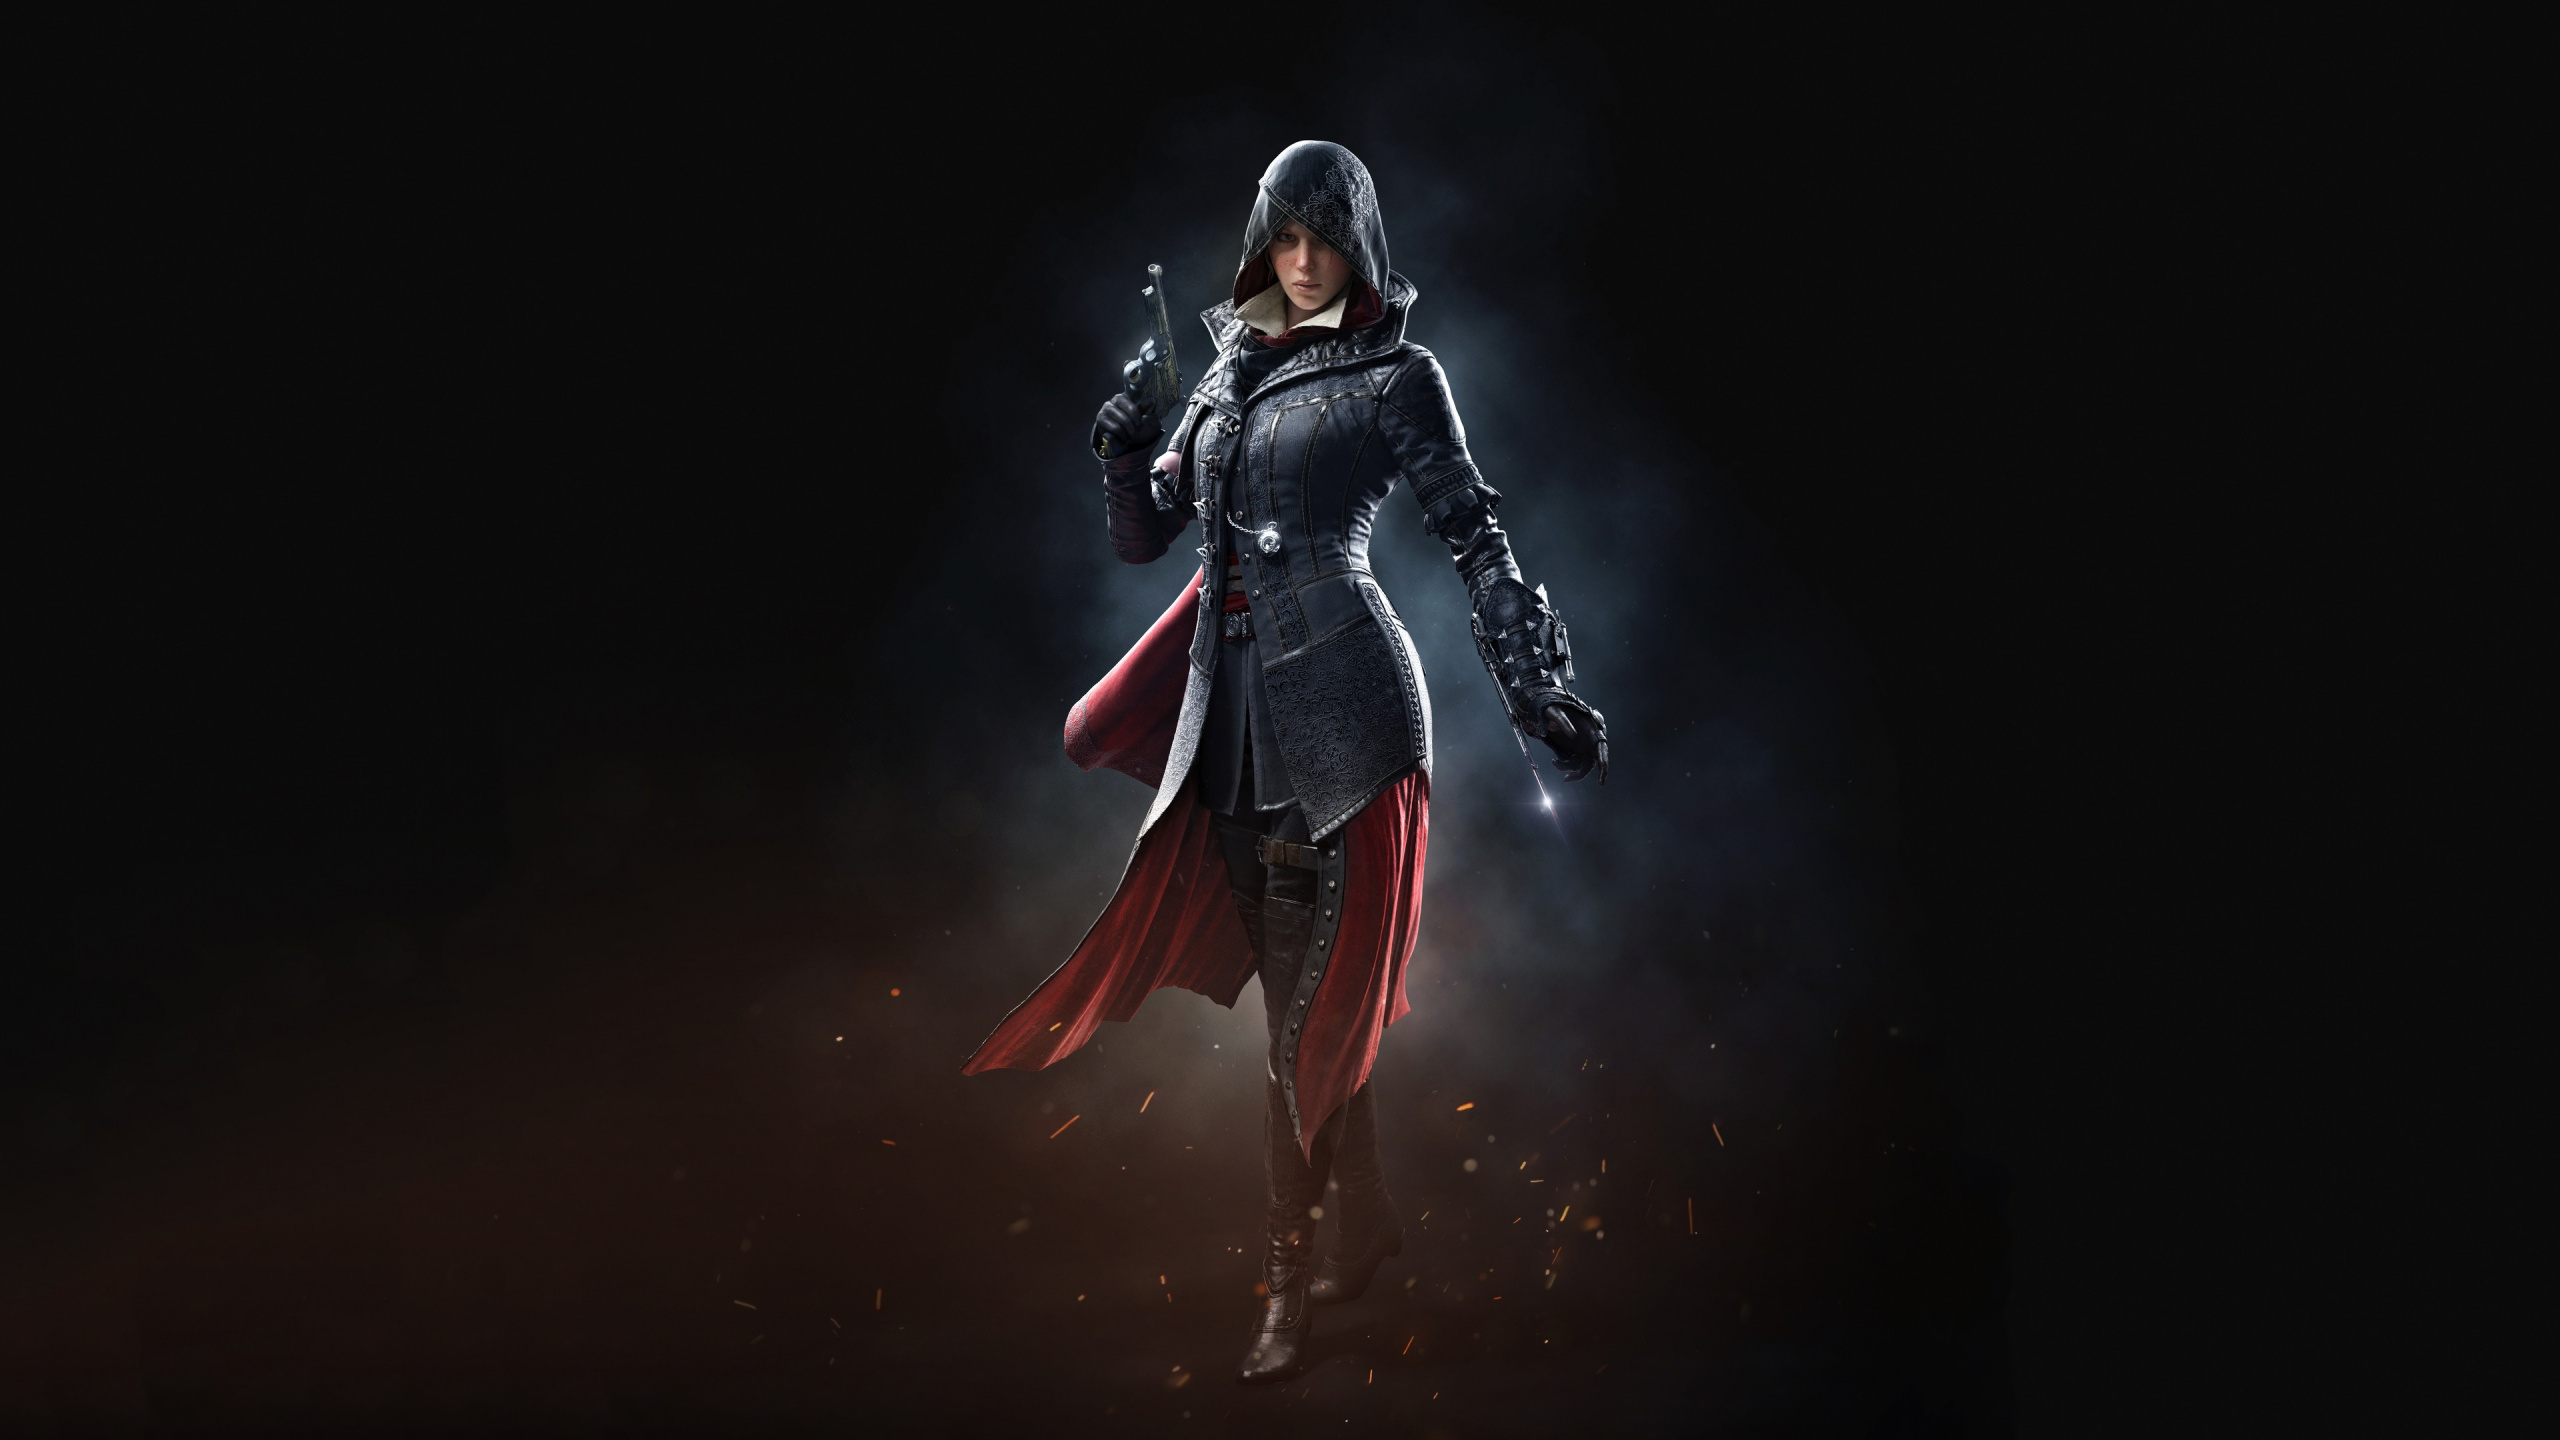 Assassins Creed Syndicate, Assassins Creed, Darkness, Superhero, Action Figure. Wallpaper in 2560x1440 Resolution